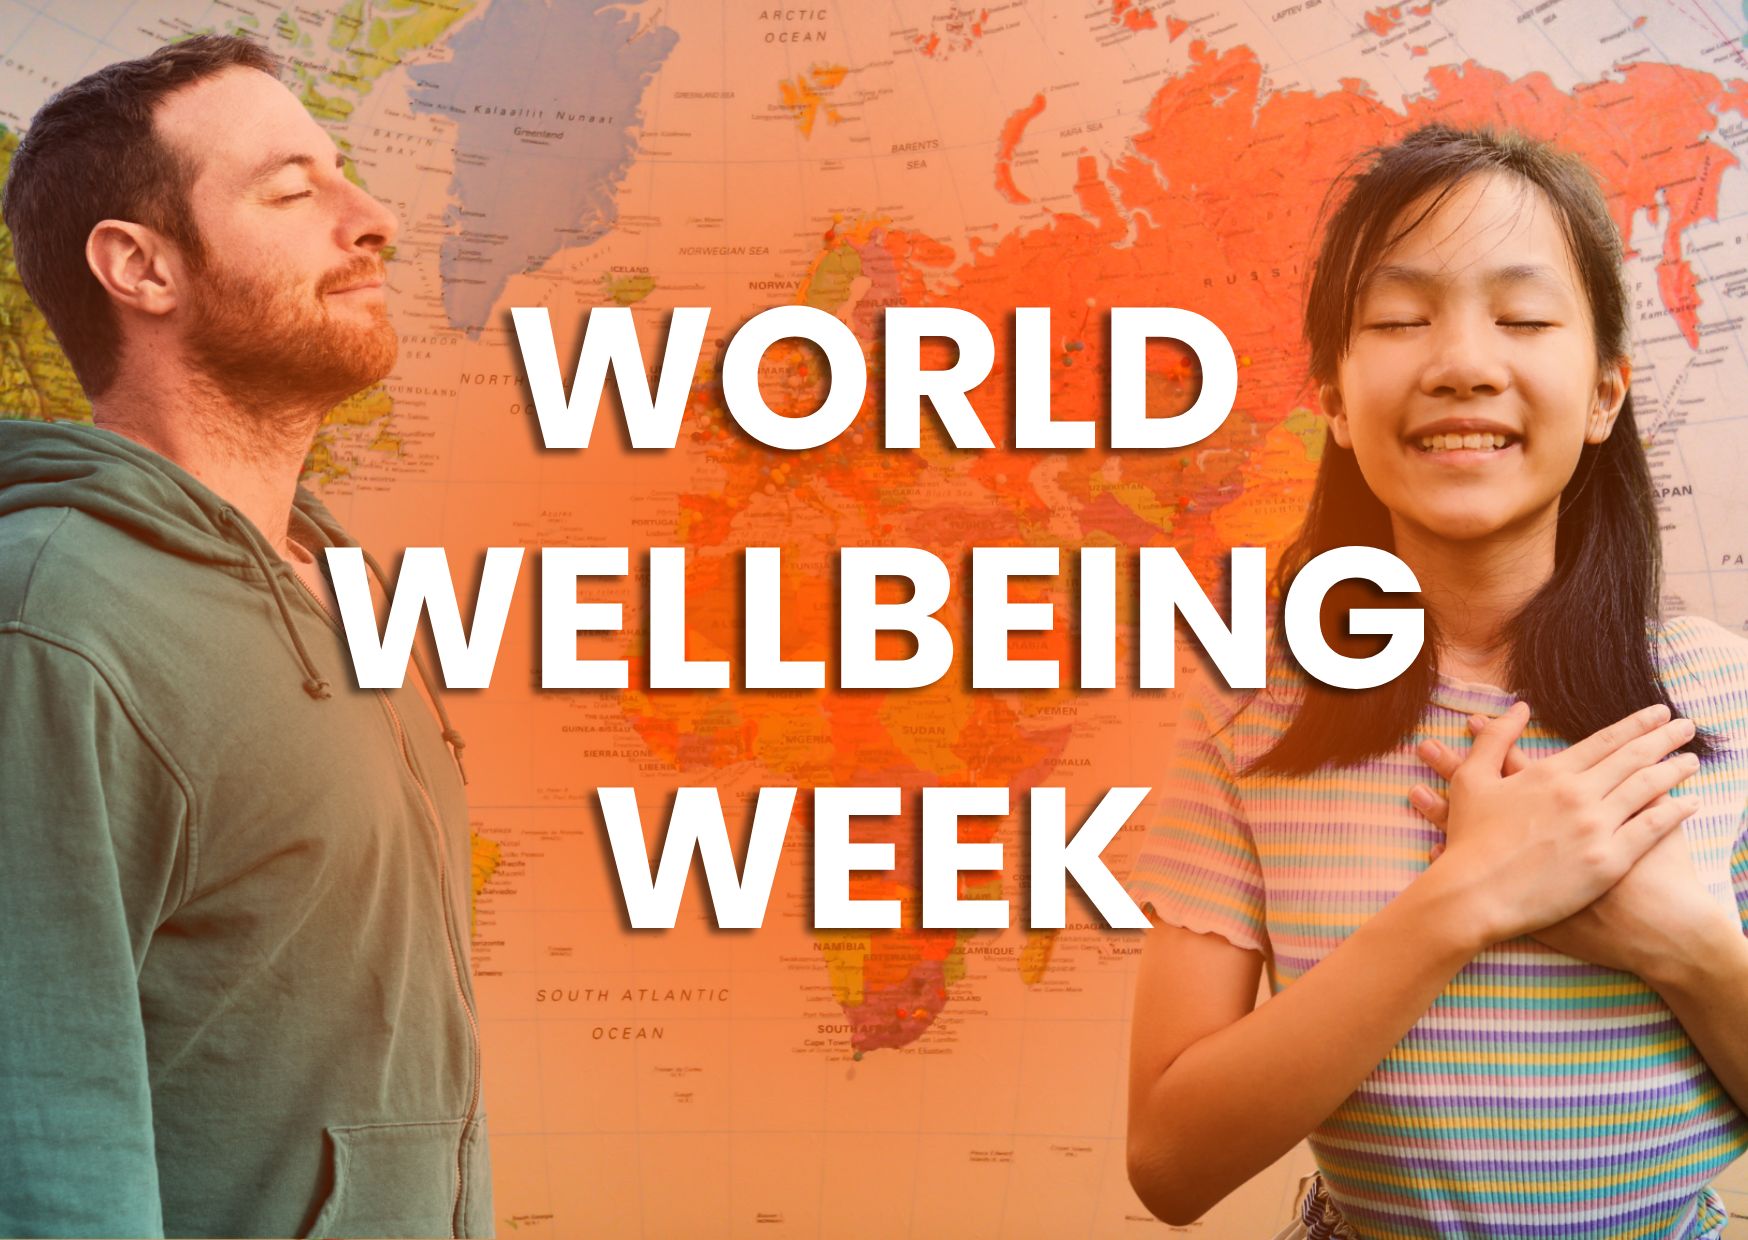 WORLD-WELLBEING-WEEK-WITH-GLOBAL-MAP-AND-MAN-AND-WOMAN-TAKING-CARE-OF-THEIR-WELLBEING